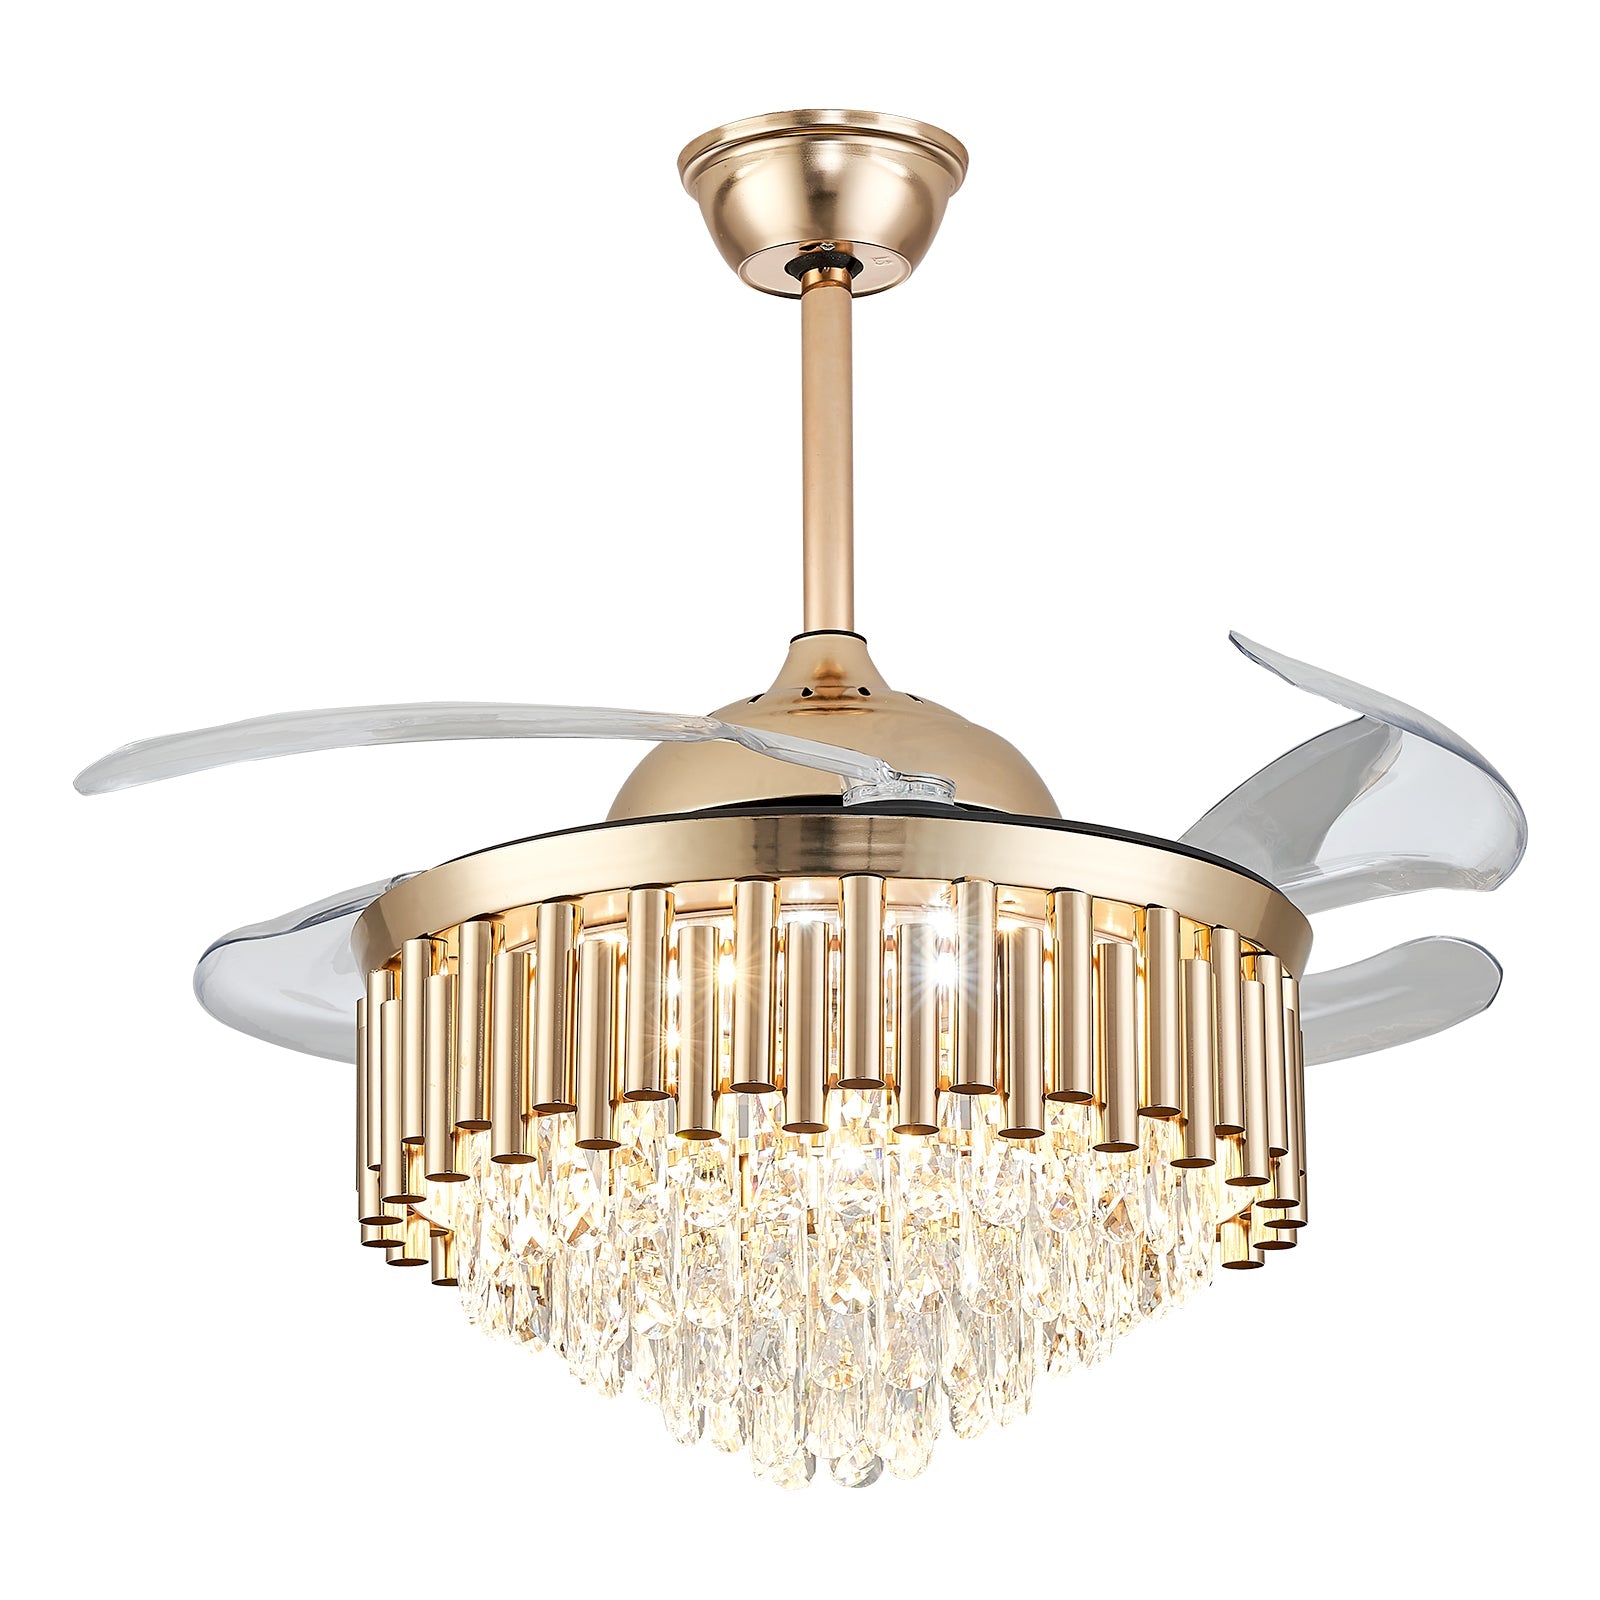 Alvin 42" Crystal LED  Dimmable Ceiling Fan Chandelier For Dining Room, APP Control, 6-Speed